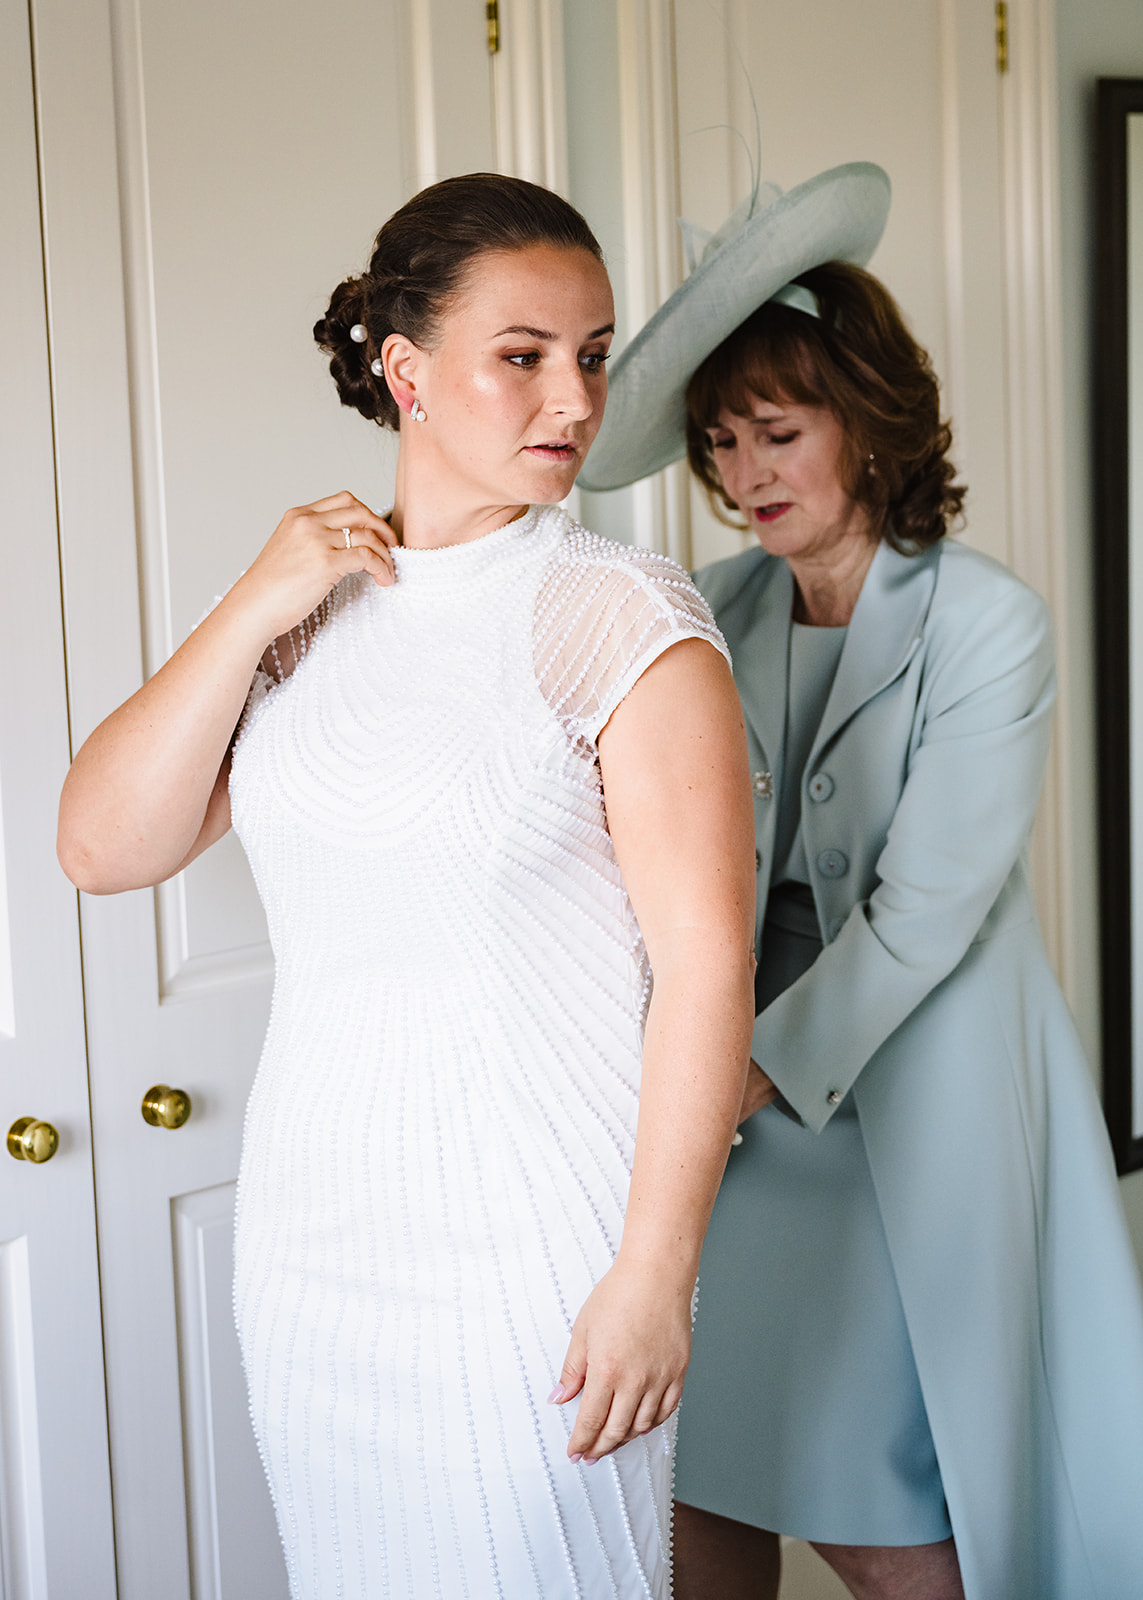 Brides mum helping her get in to her dress